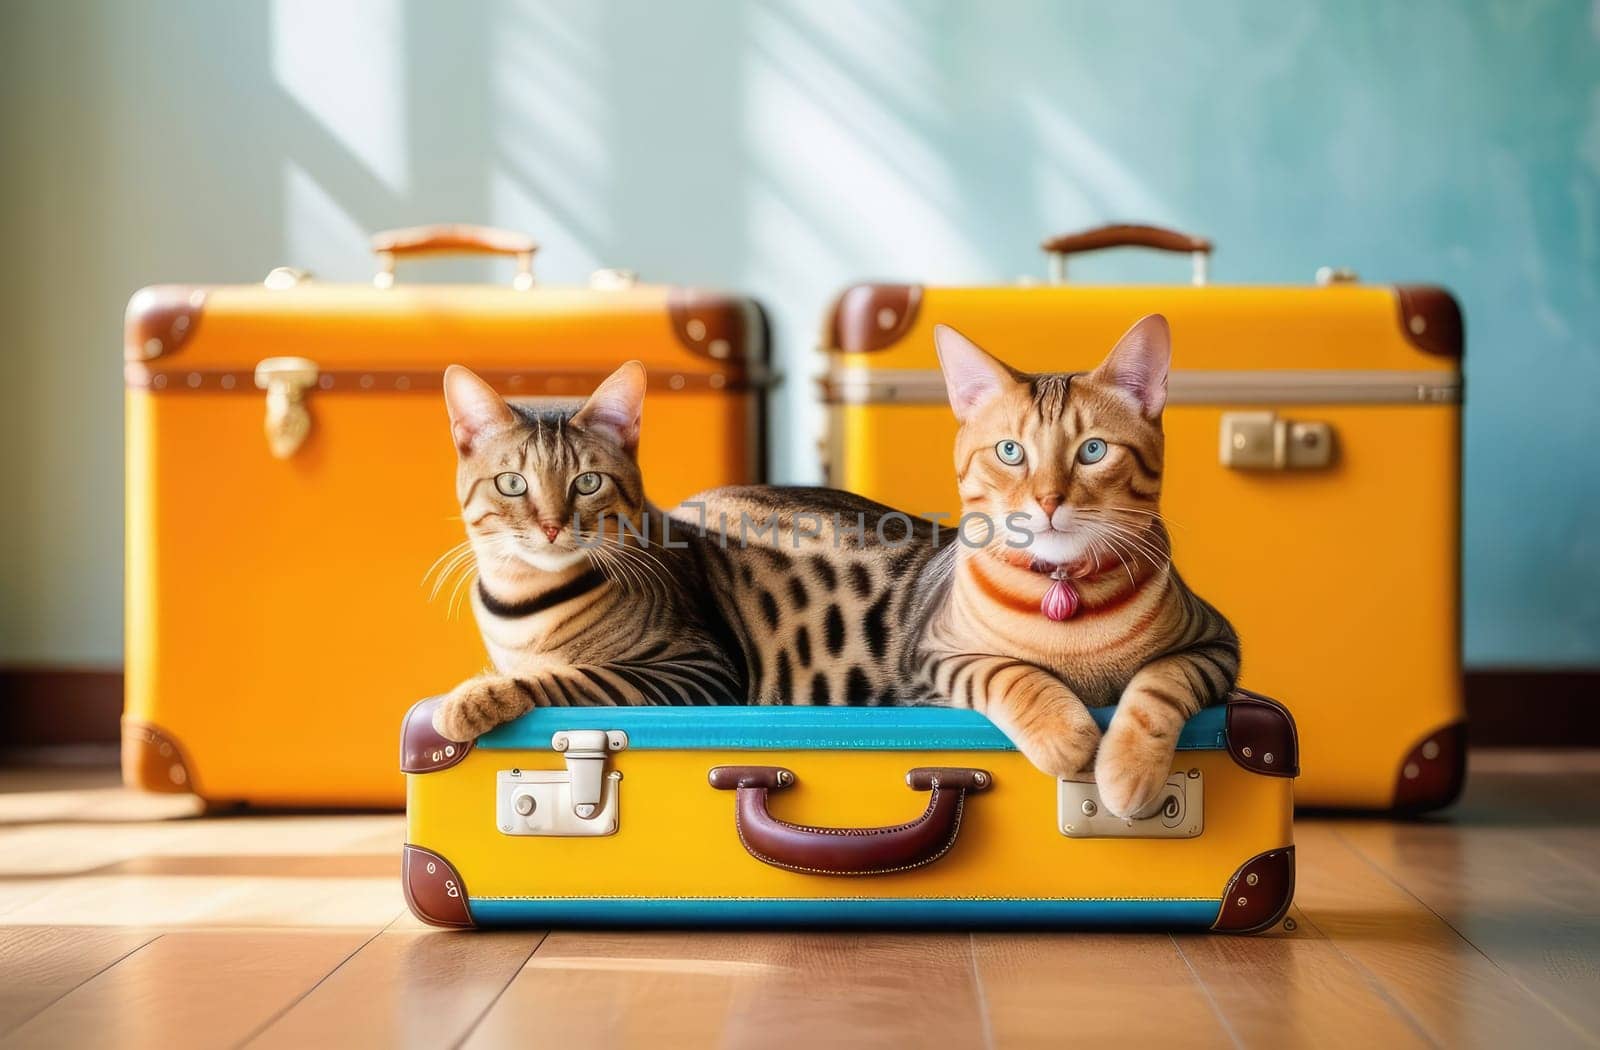 Concept vacation, vacation. Beautiful striped purebred two Bengal cats are sitting on a yellow suitcase in a home interior.